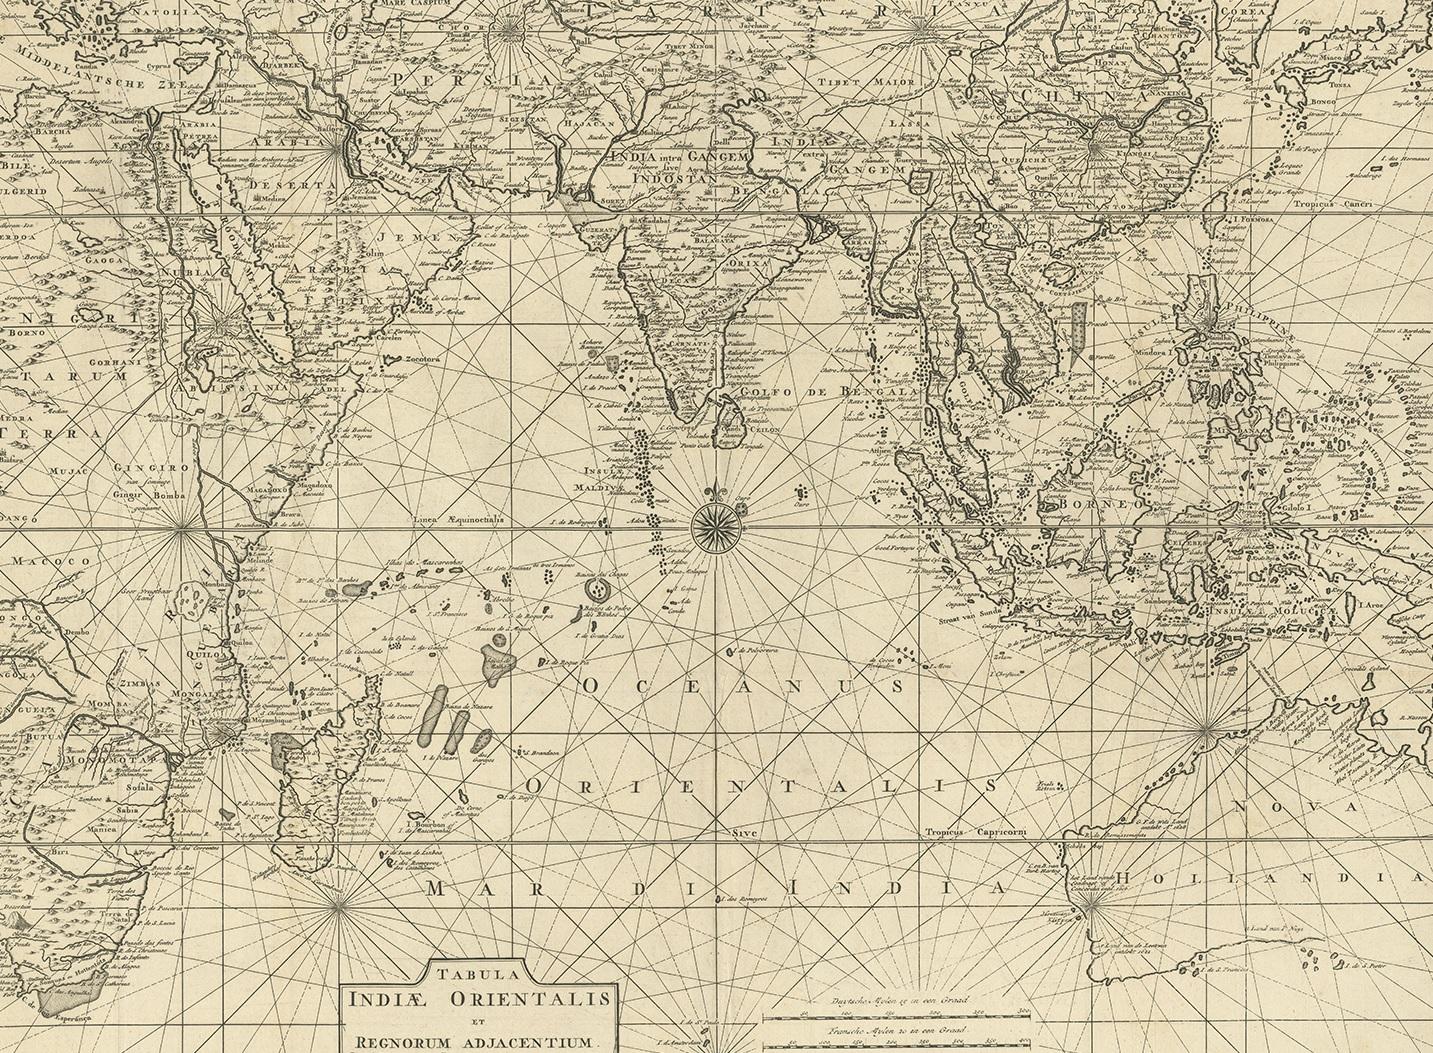 Antique map titled 'Tabula Indiae Orientalis'. 

Beautiful detailed map of Australia, Southeast Asia and the Indian Ocean. The map features a fine depiction of the outlines of the western two-thirds of Australia, based on the discoveries of